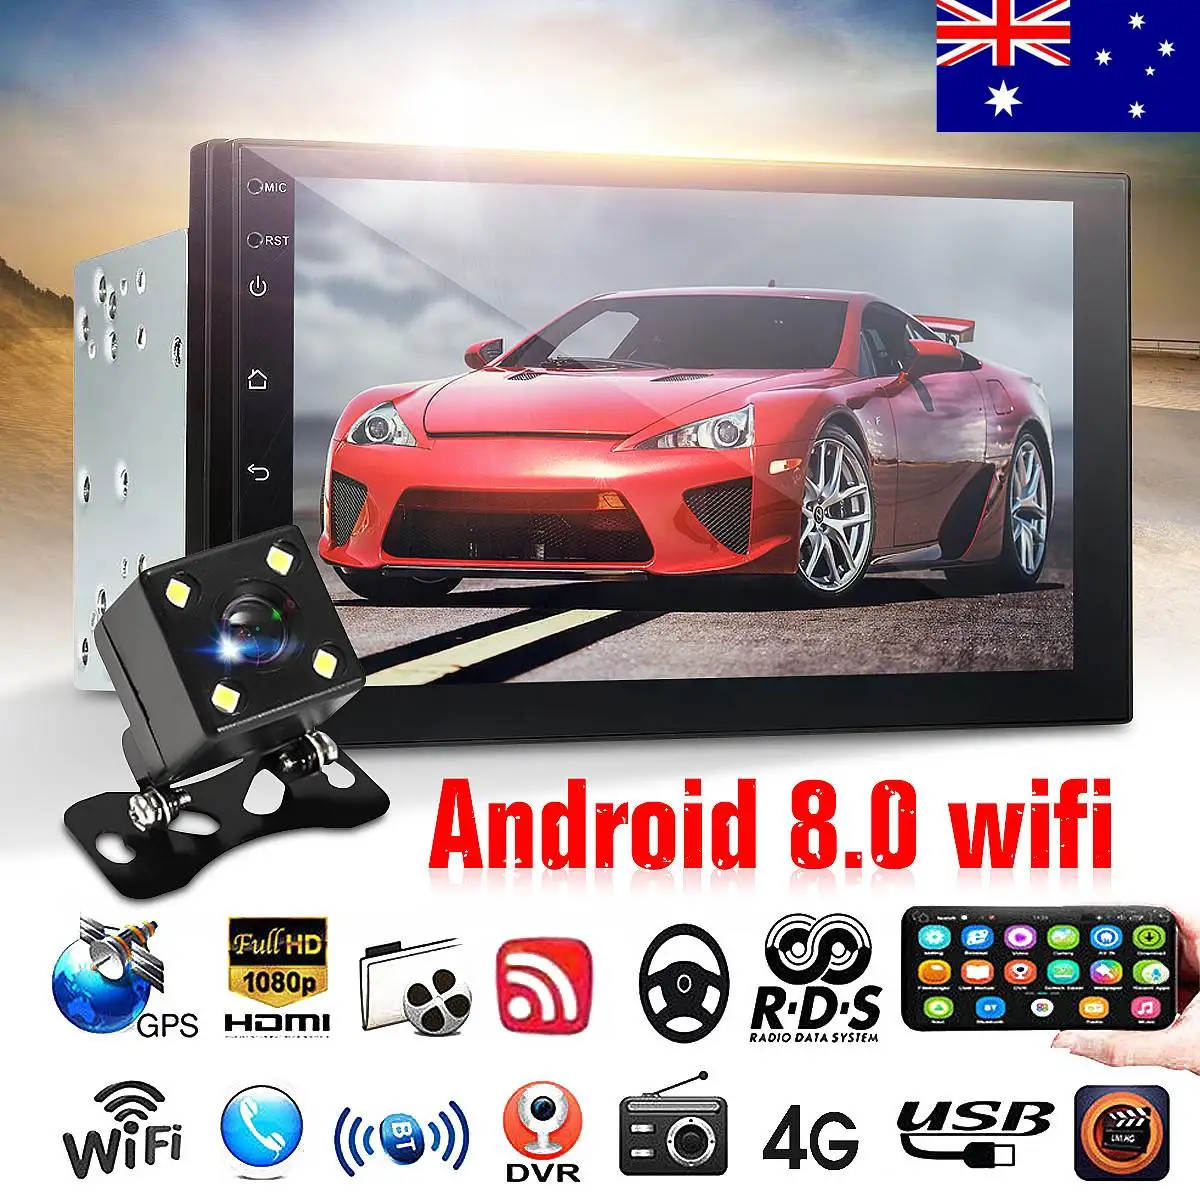 

2021 IMARS 7 Inch 2 Din Car Stereo Radio MP5 Player Android 8.0 GPS Navigation WIFI2.5D 1024x600 Screen Bluetooth FM with Camera